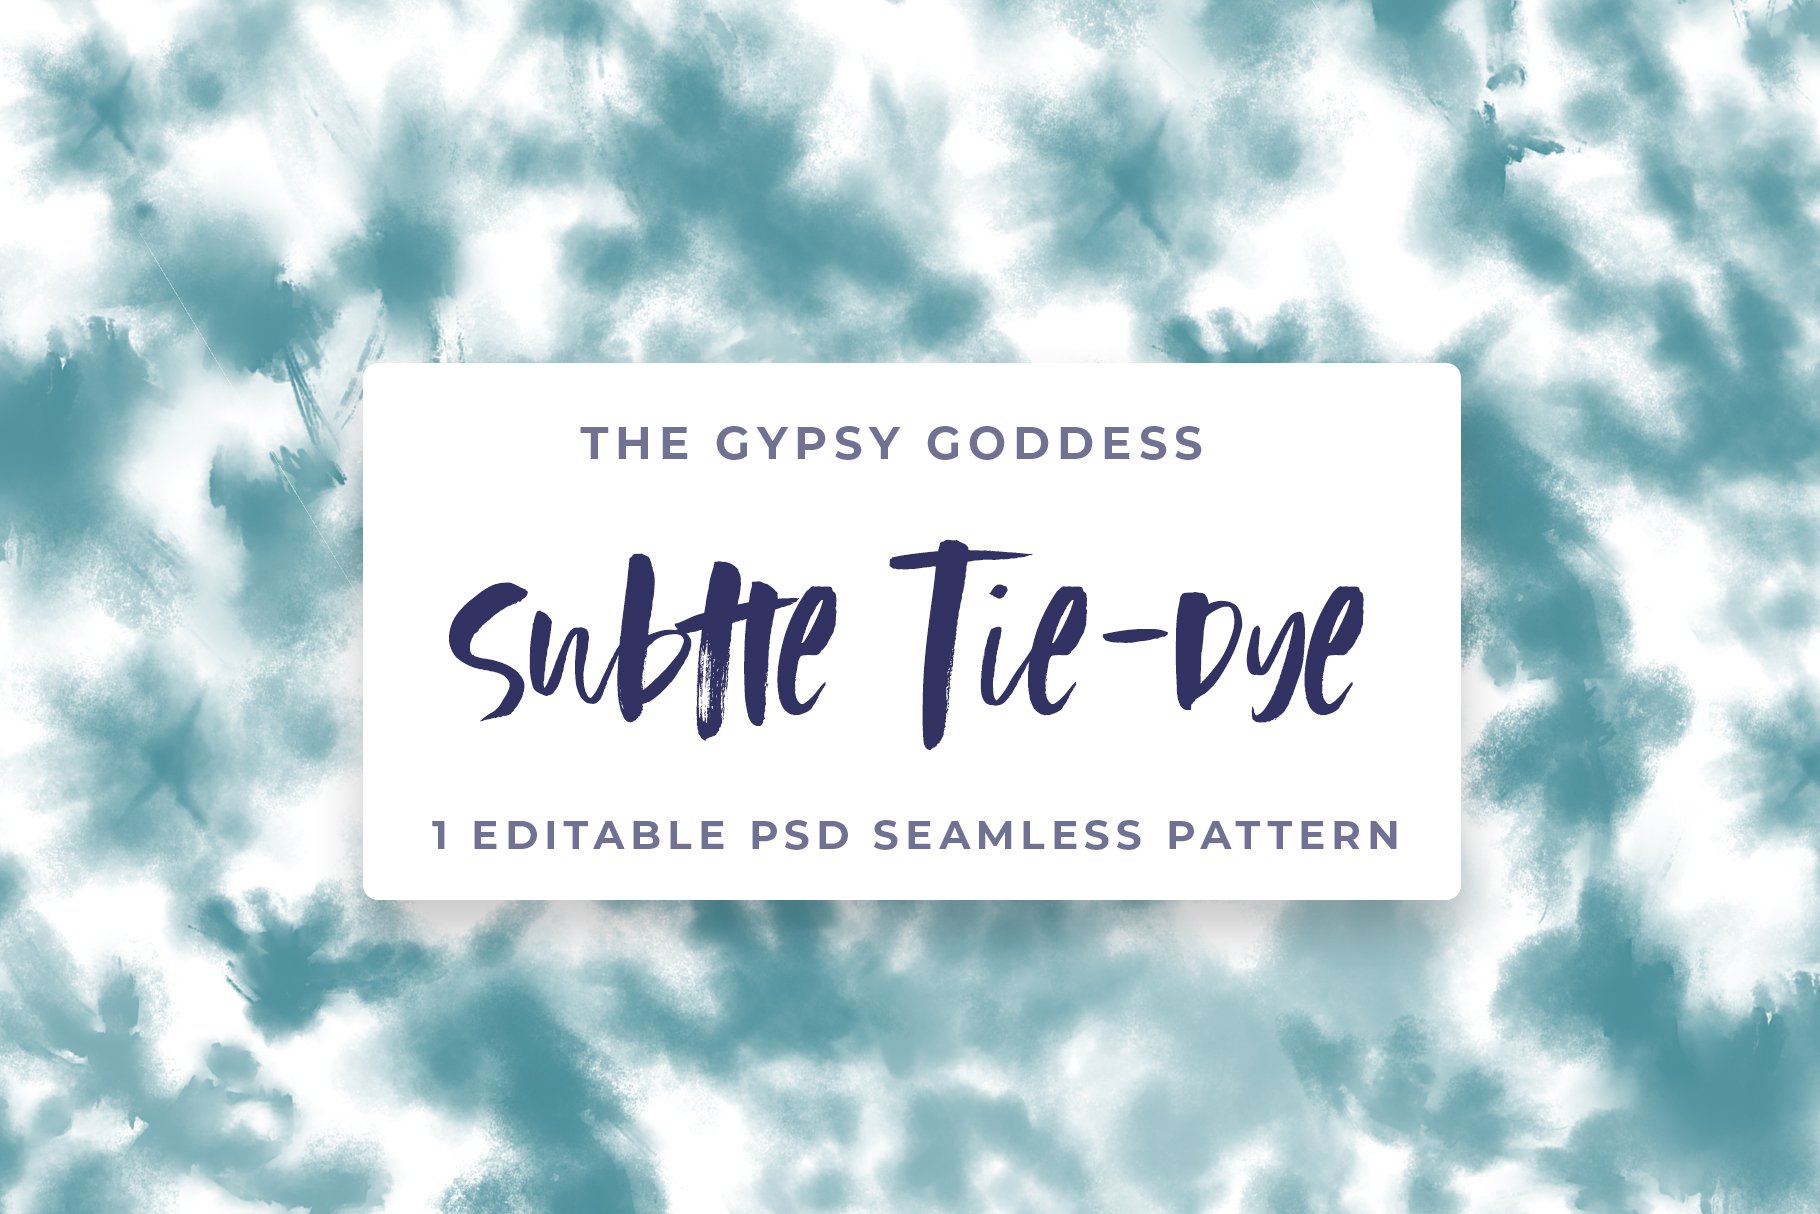 Subtle Tie-Dye Seamless Pattern cover image.